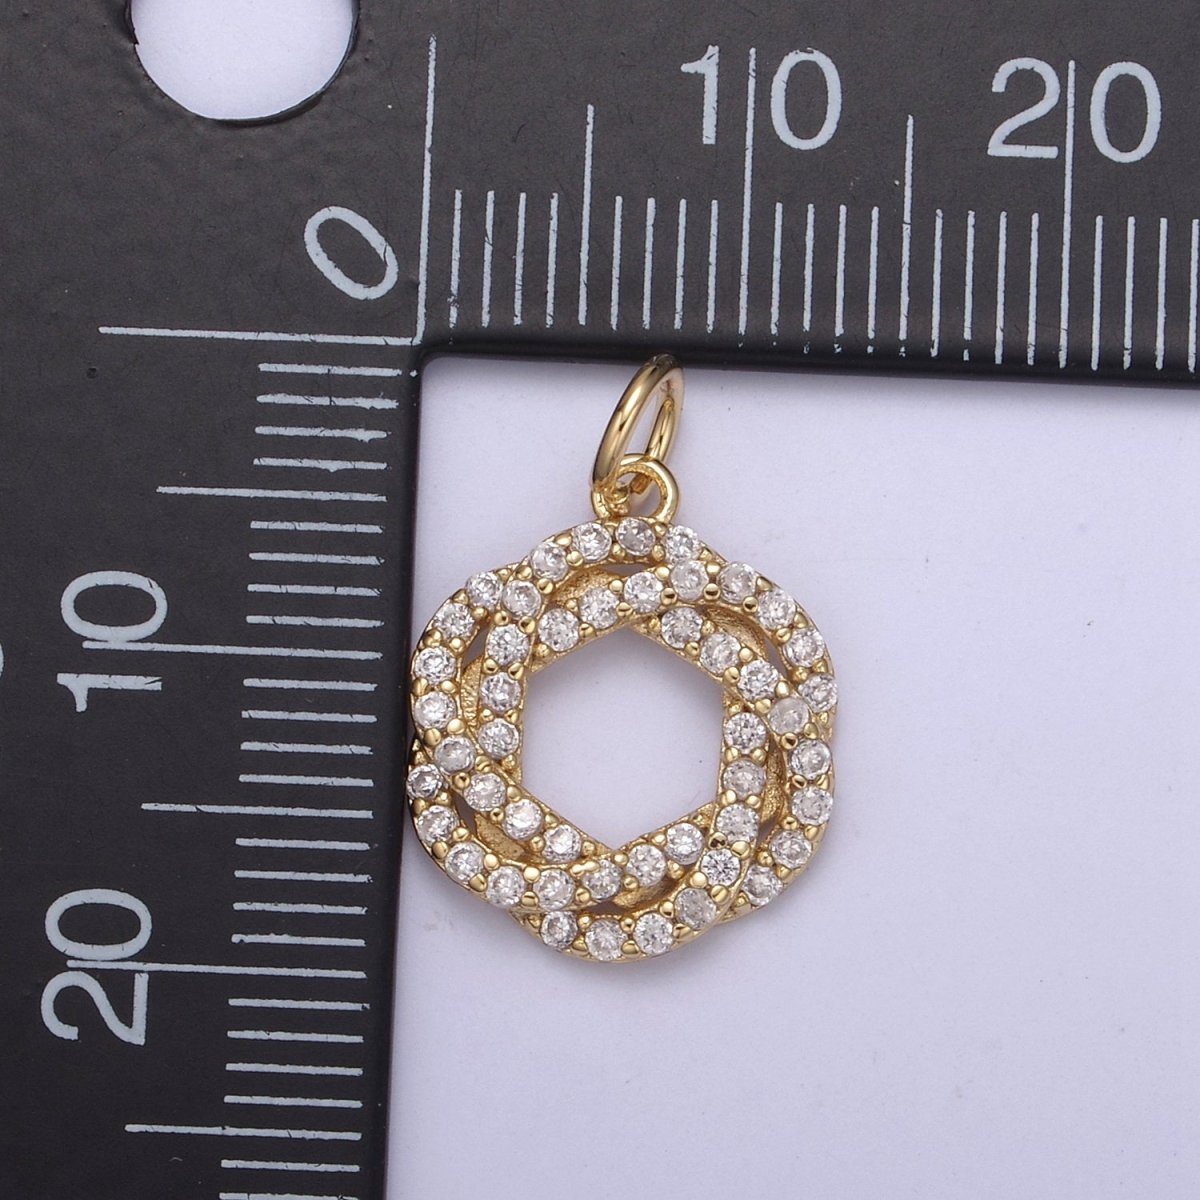 Dainty Flower Charms, Micro Pave Floral Pendant Jewelry 14K Gold Filled Flower Charm Add on Pendant N-410 - DLUXCA